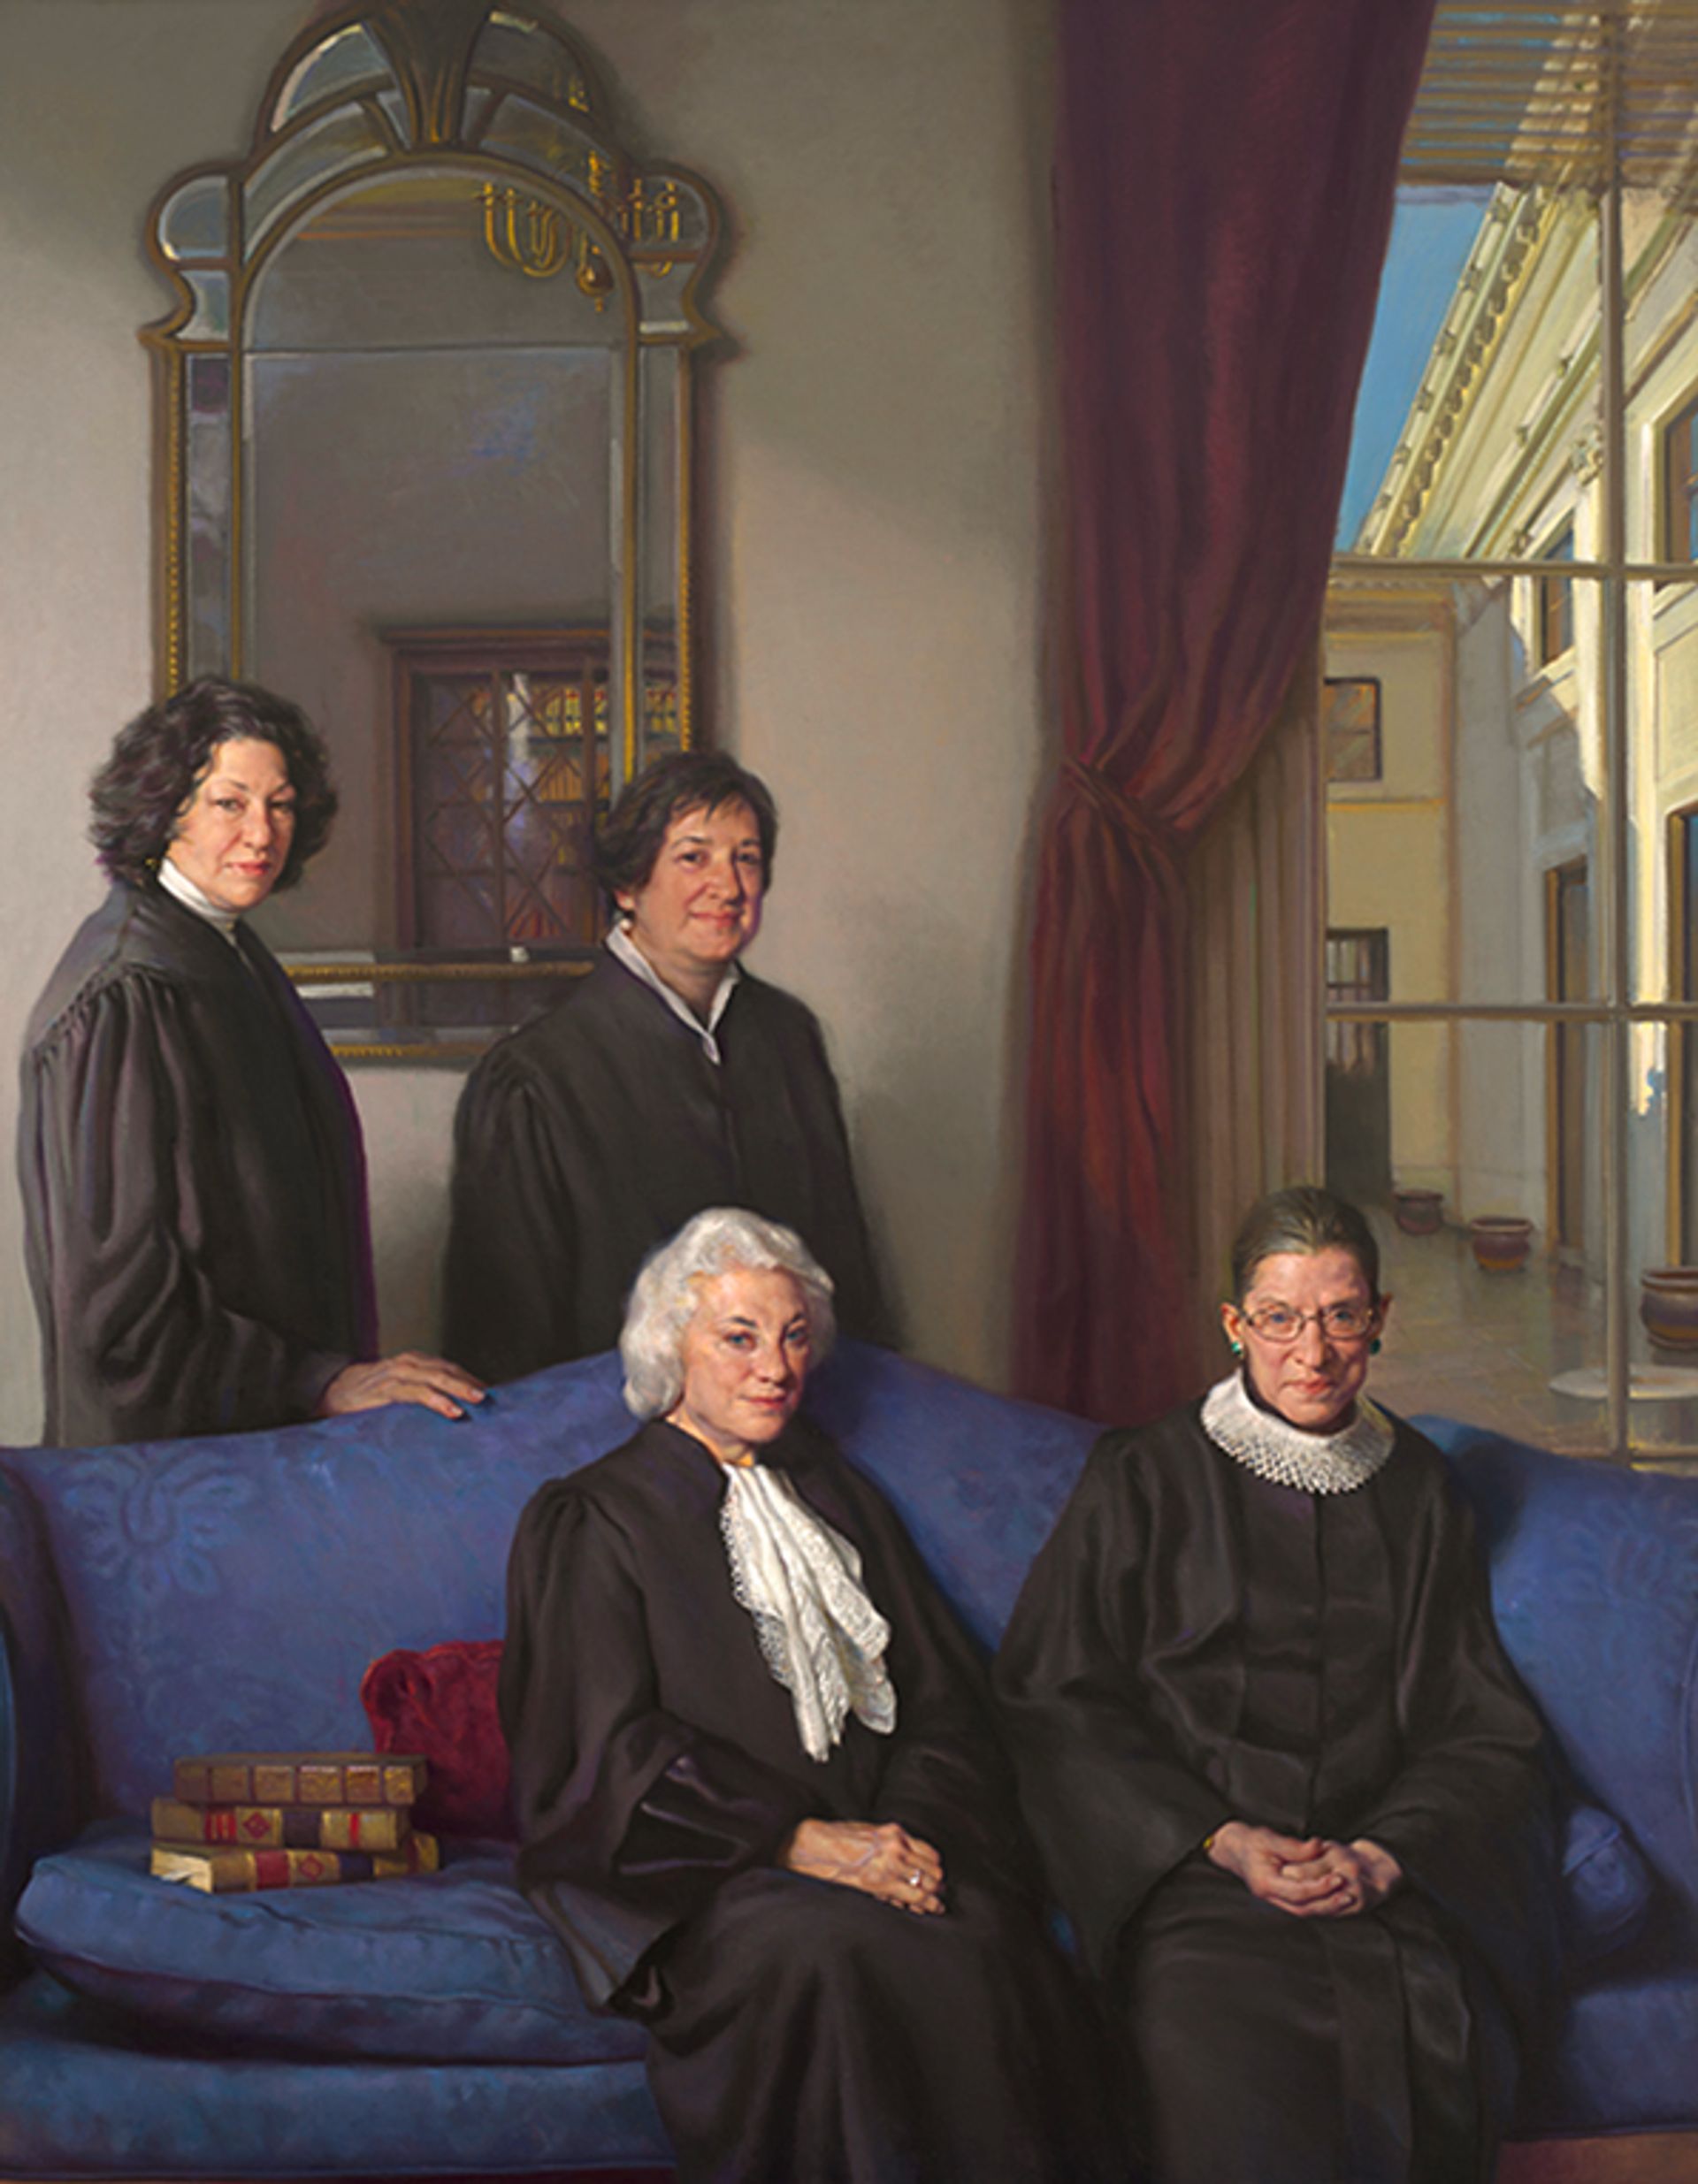 Nelson Shanks, The Four Justices (2012) National Portrait Gallery, Smithsonian Institution; Gift of Ian M. and Annette P. Cumming